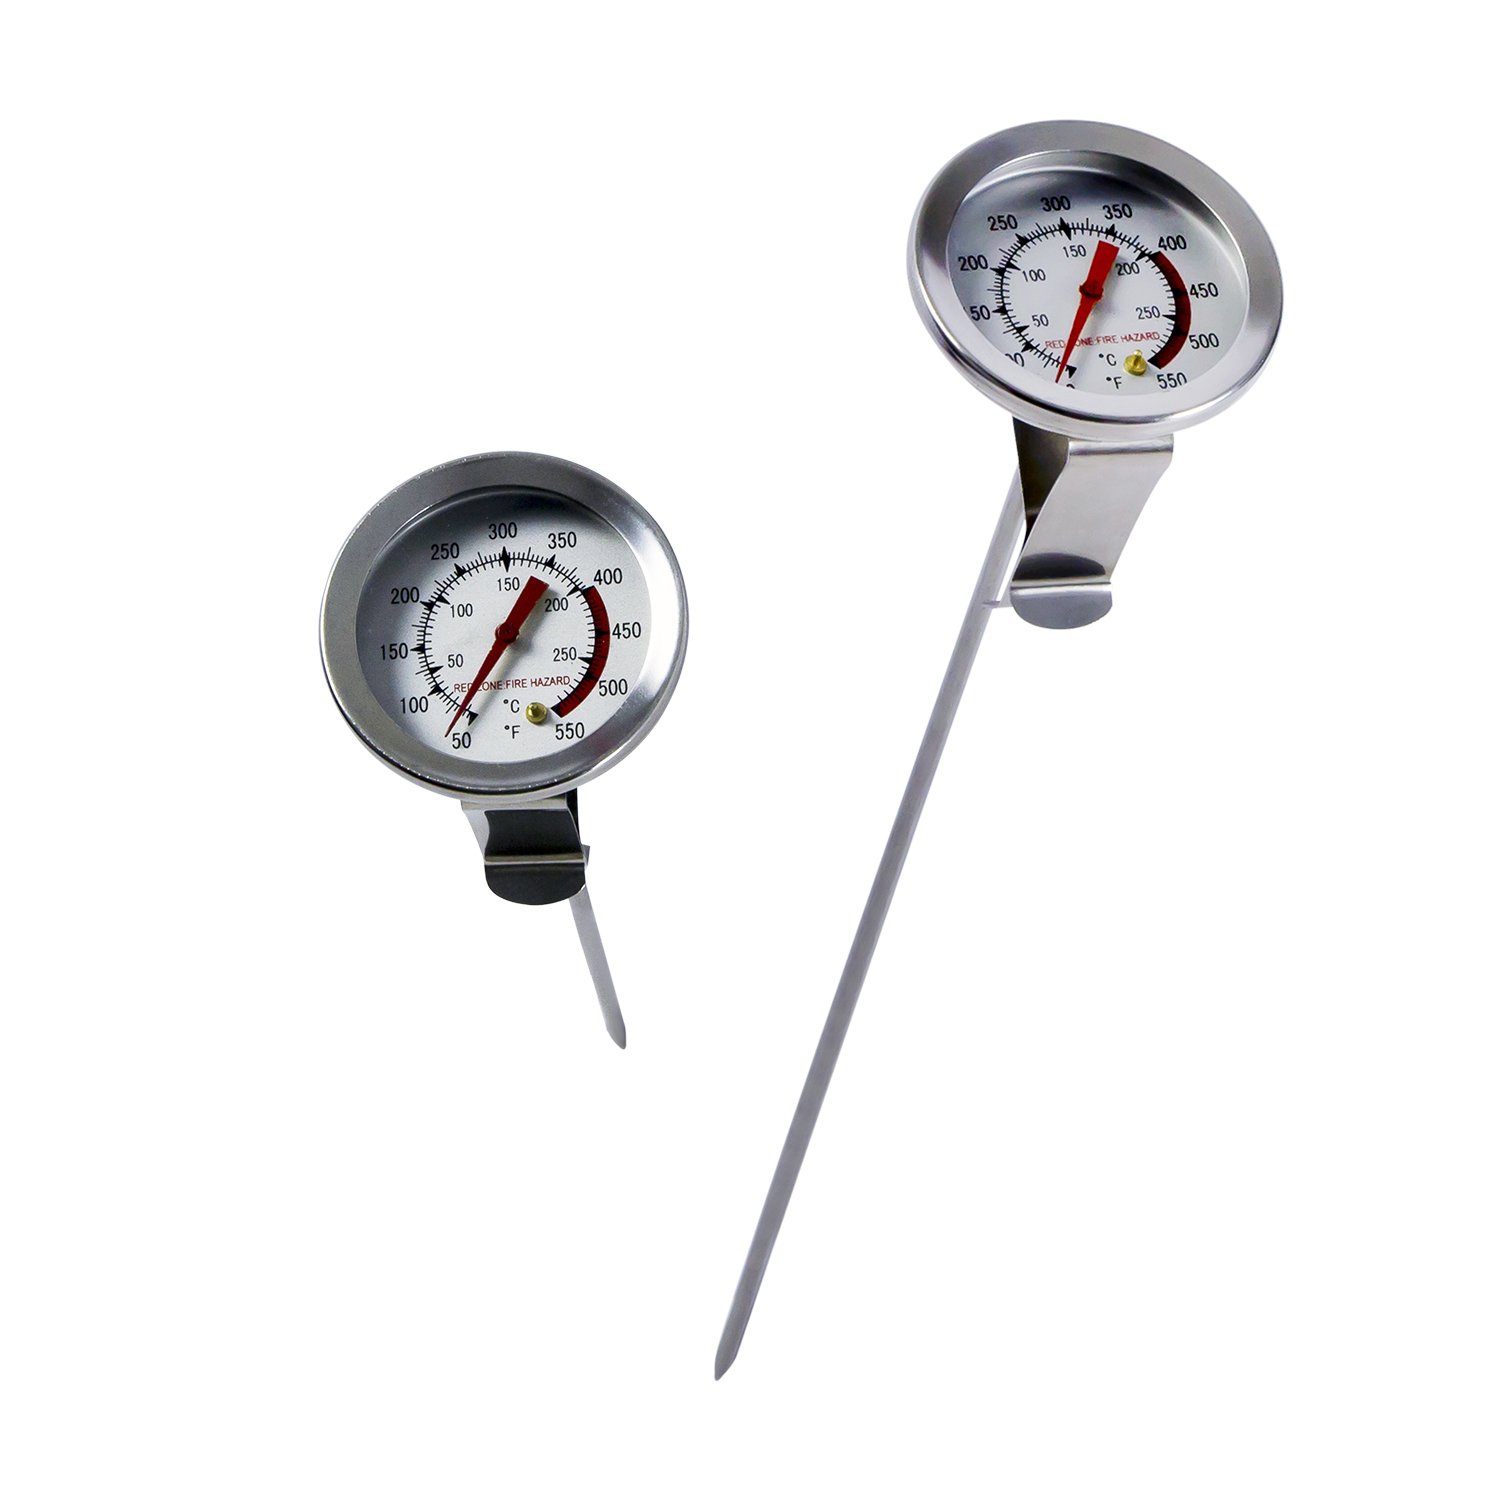 CHARD DFT-12, Deep Fry Thermometer, Stainless Steel, 12 inch